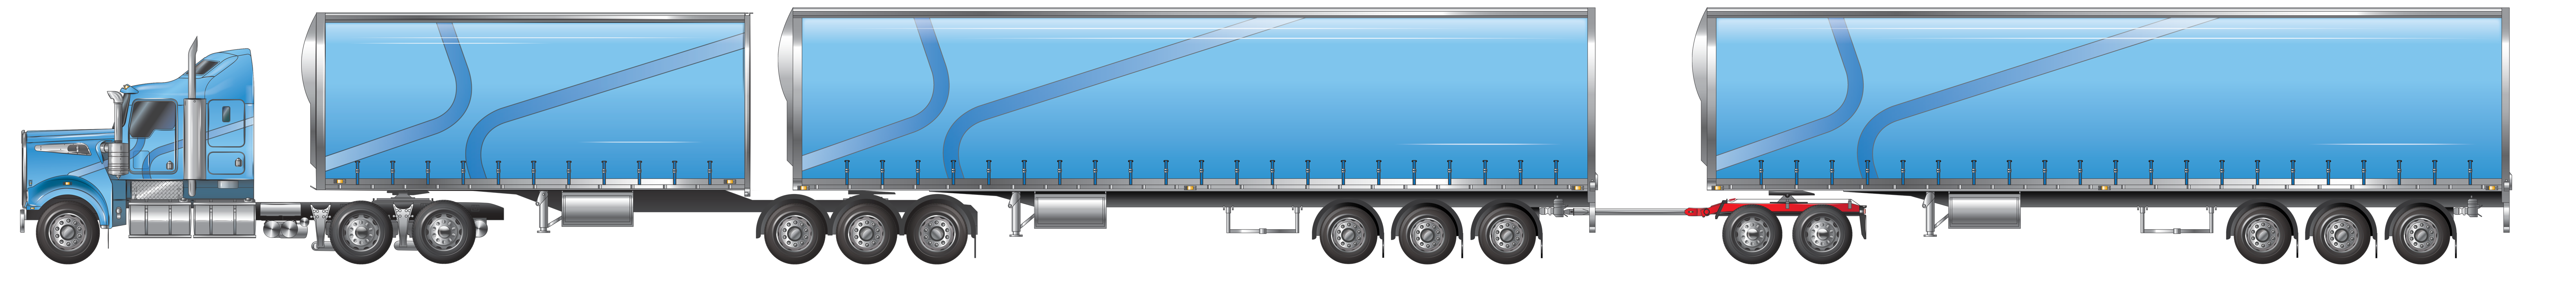 Image is of a Type 1 road train BA-triple with 14 axles